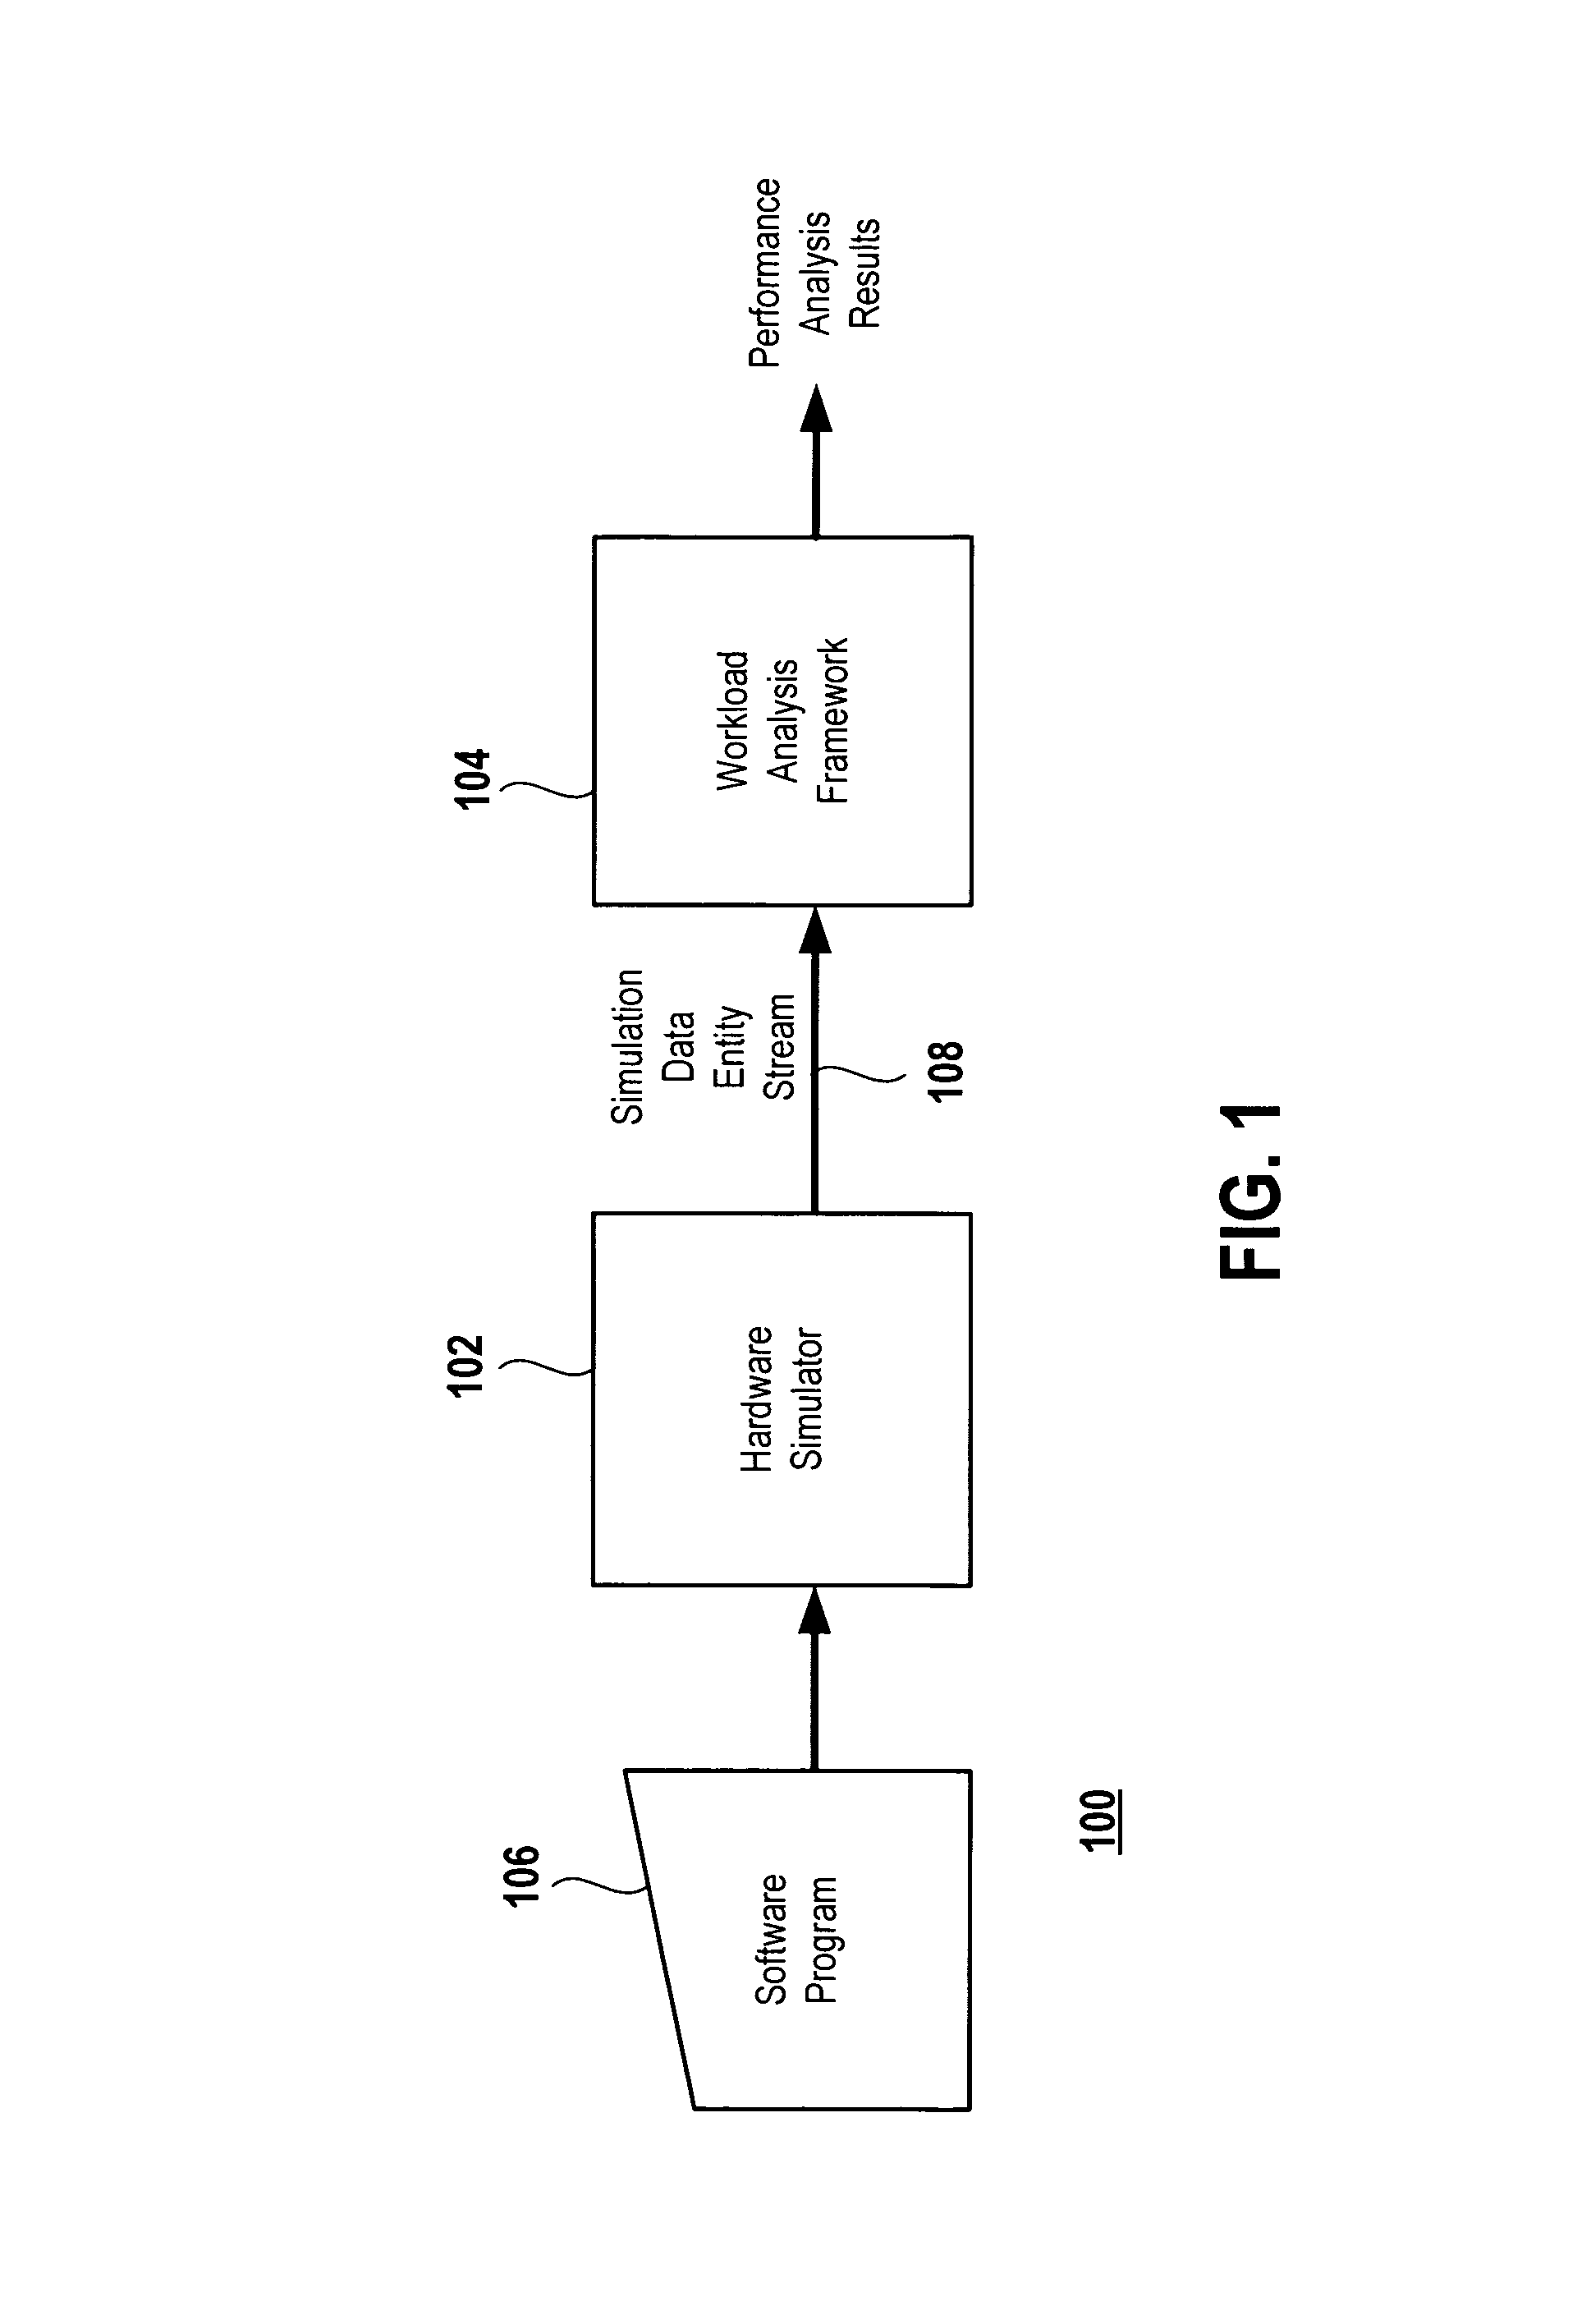 System for application level analysis of hardware simulations